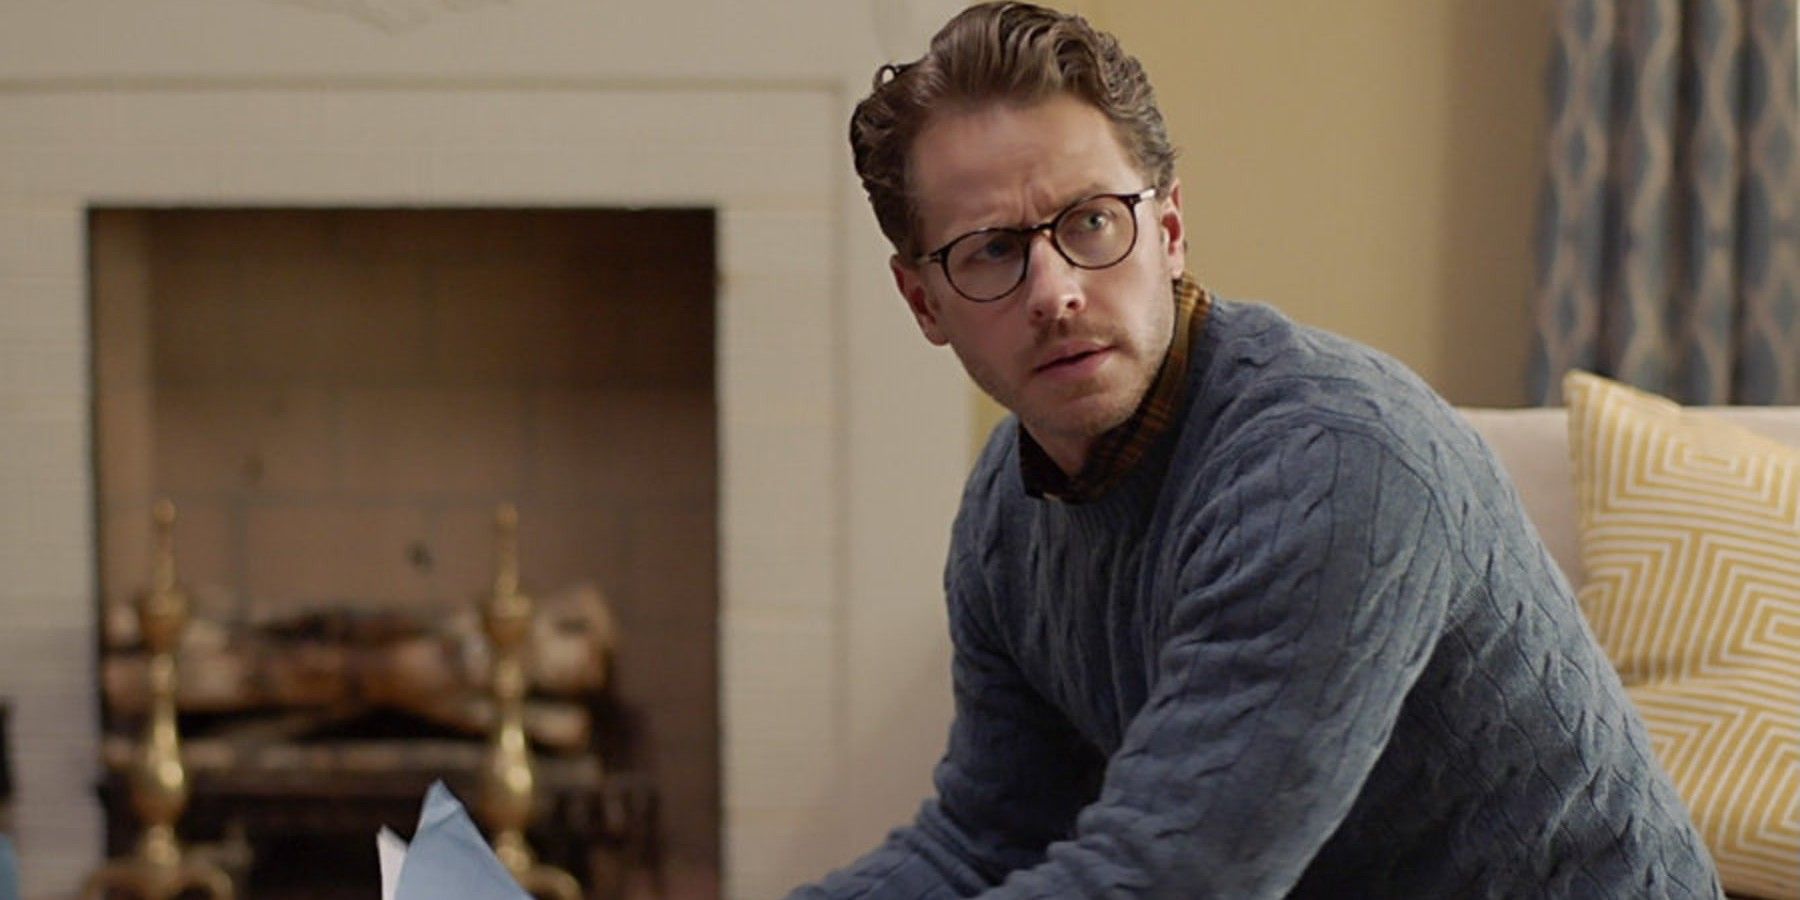 Manifest Season 4 Finds Ben In A Difficult Place, Previews Josh Dallas